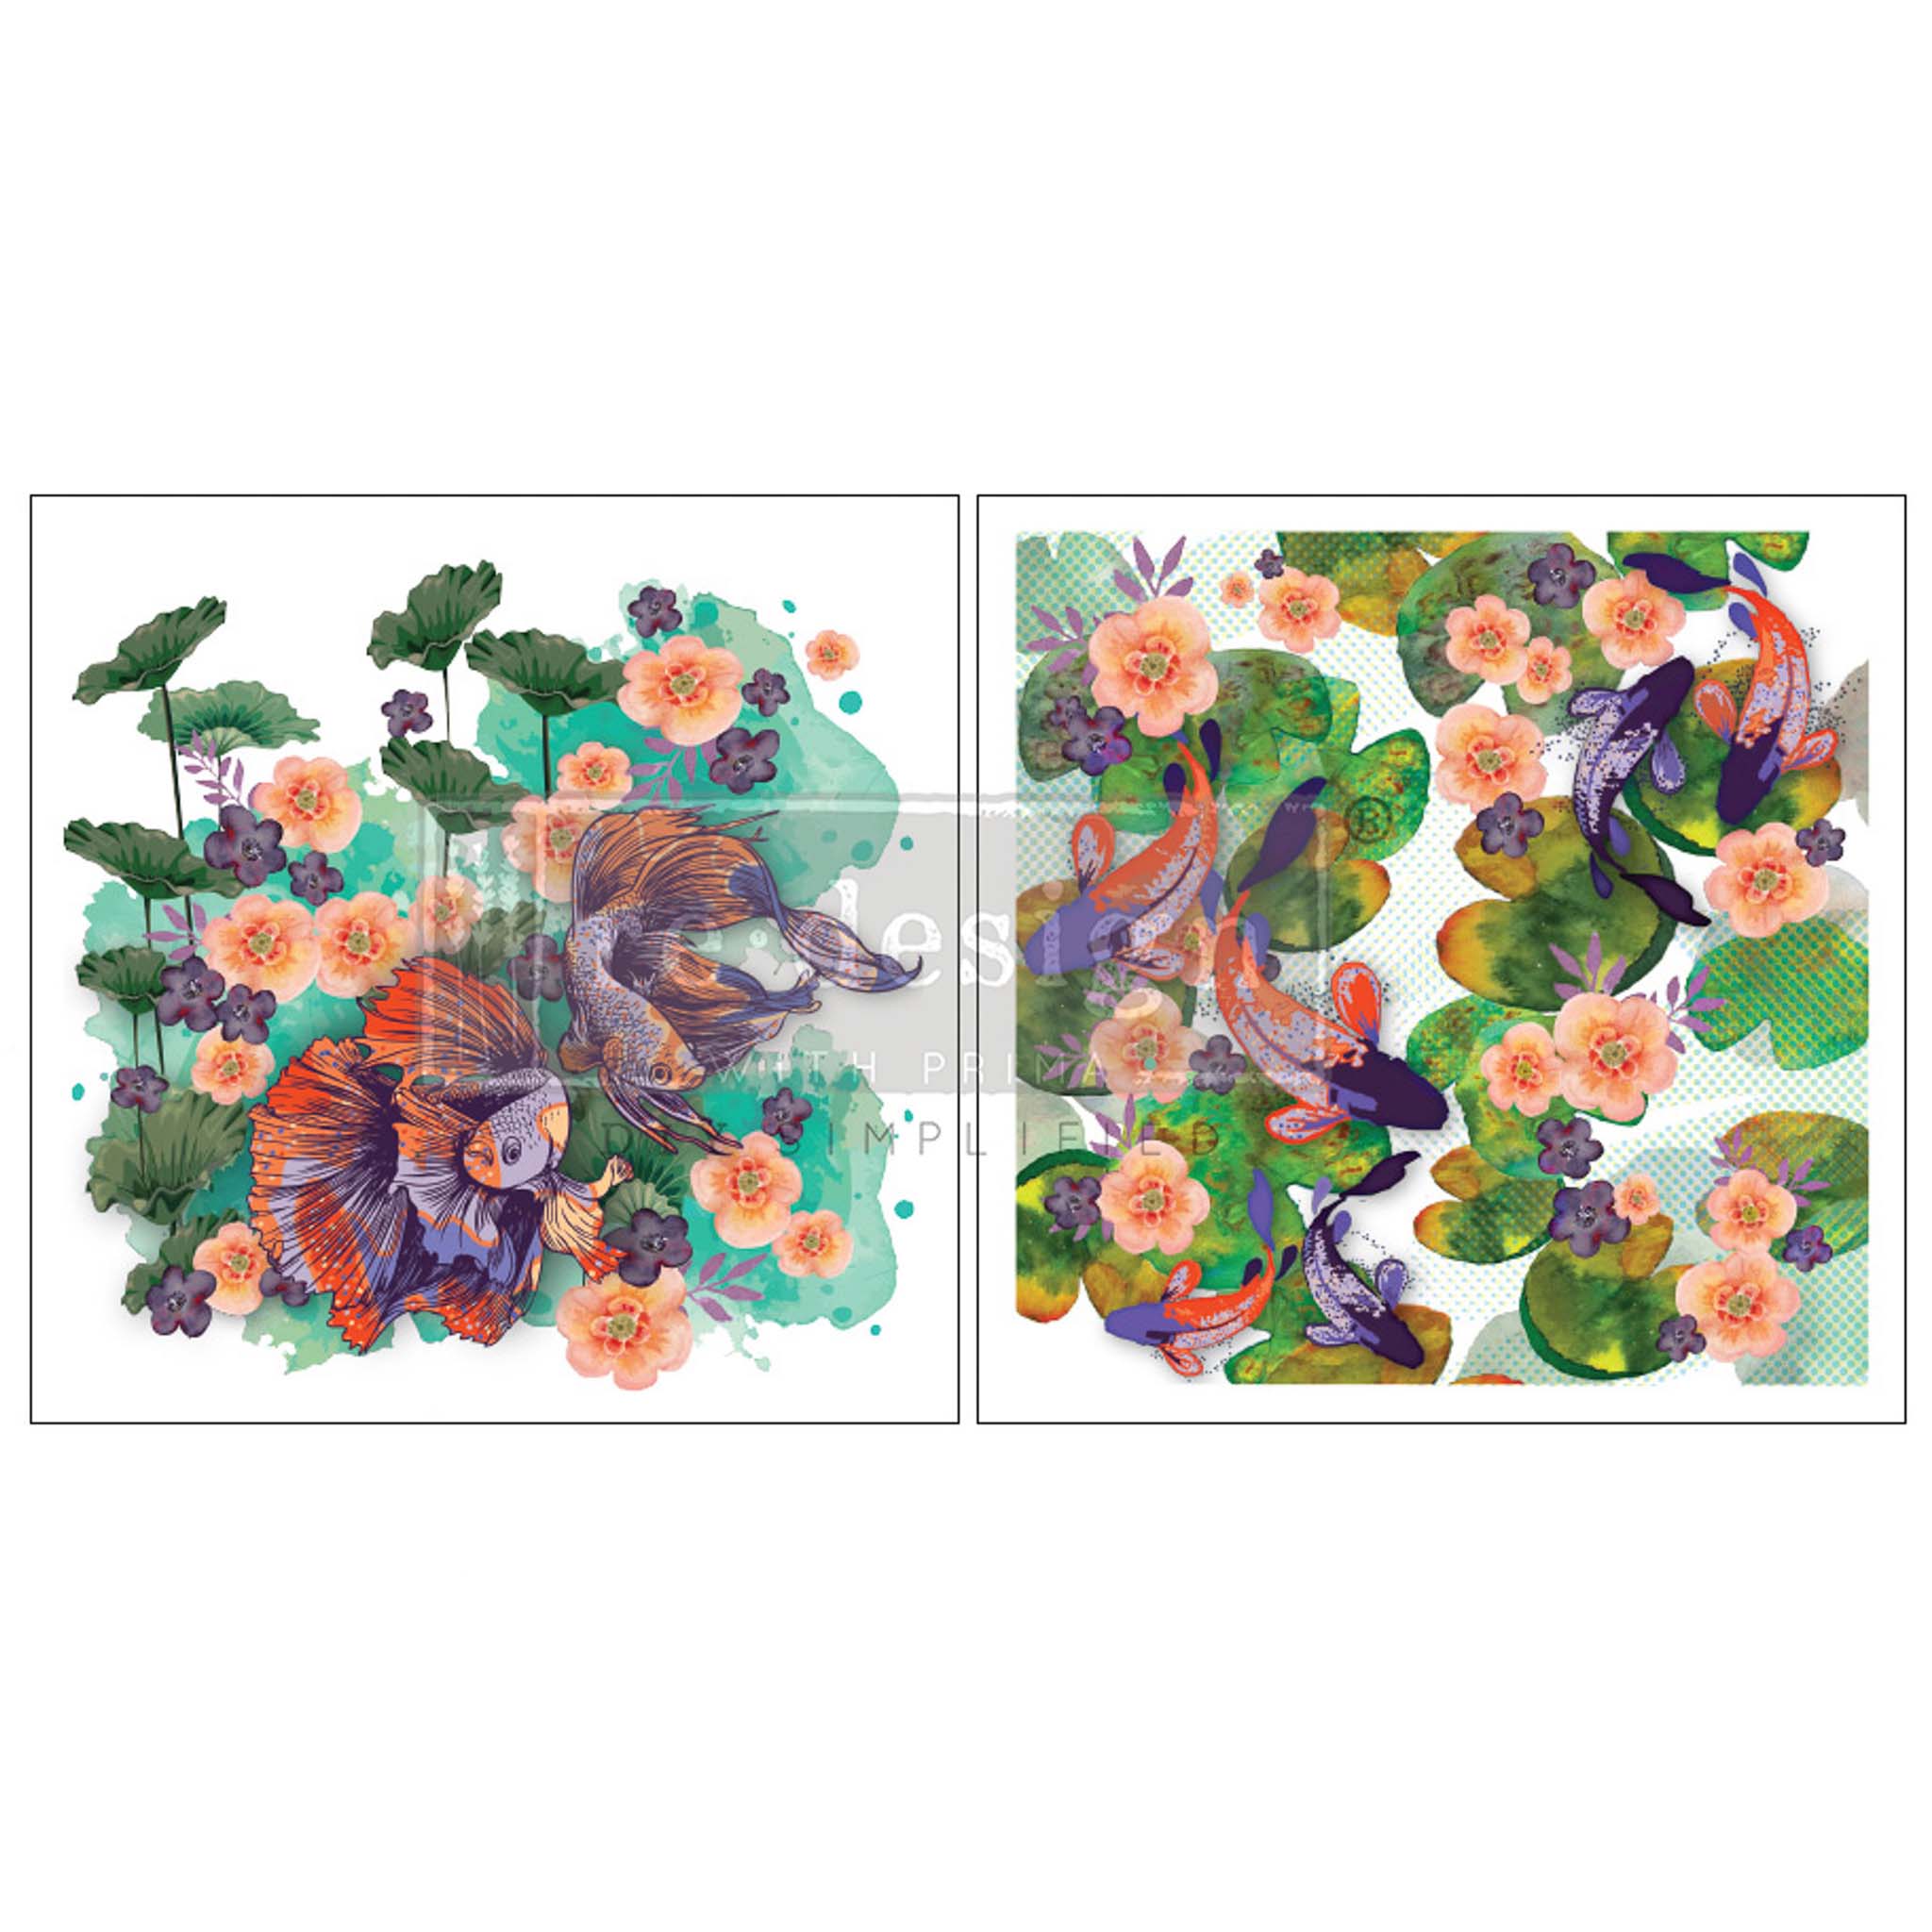 Two sheets of rub-on transfers featuring colorful koi and Siamese fighting fish surrounded by lily pads and orange and purple flowers.